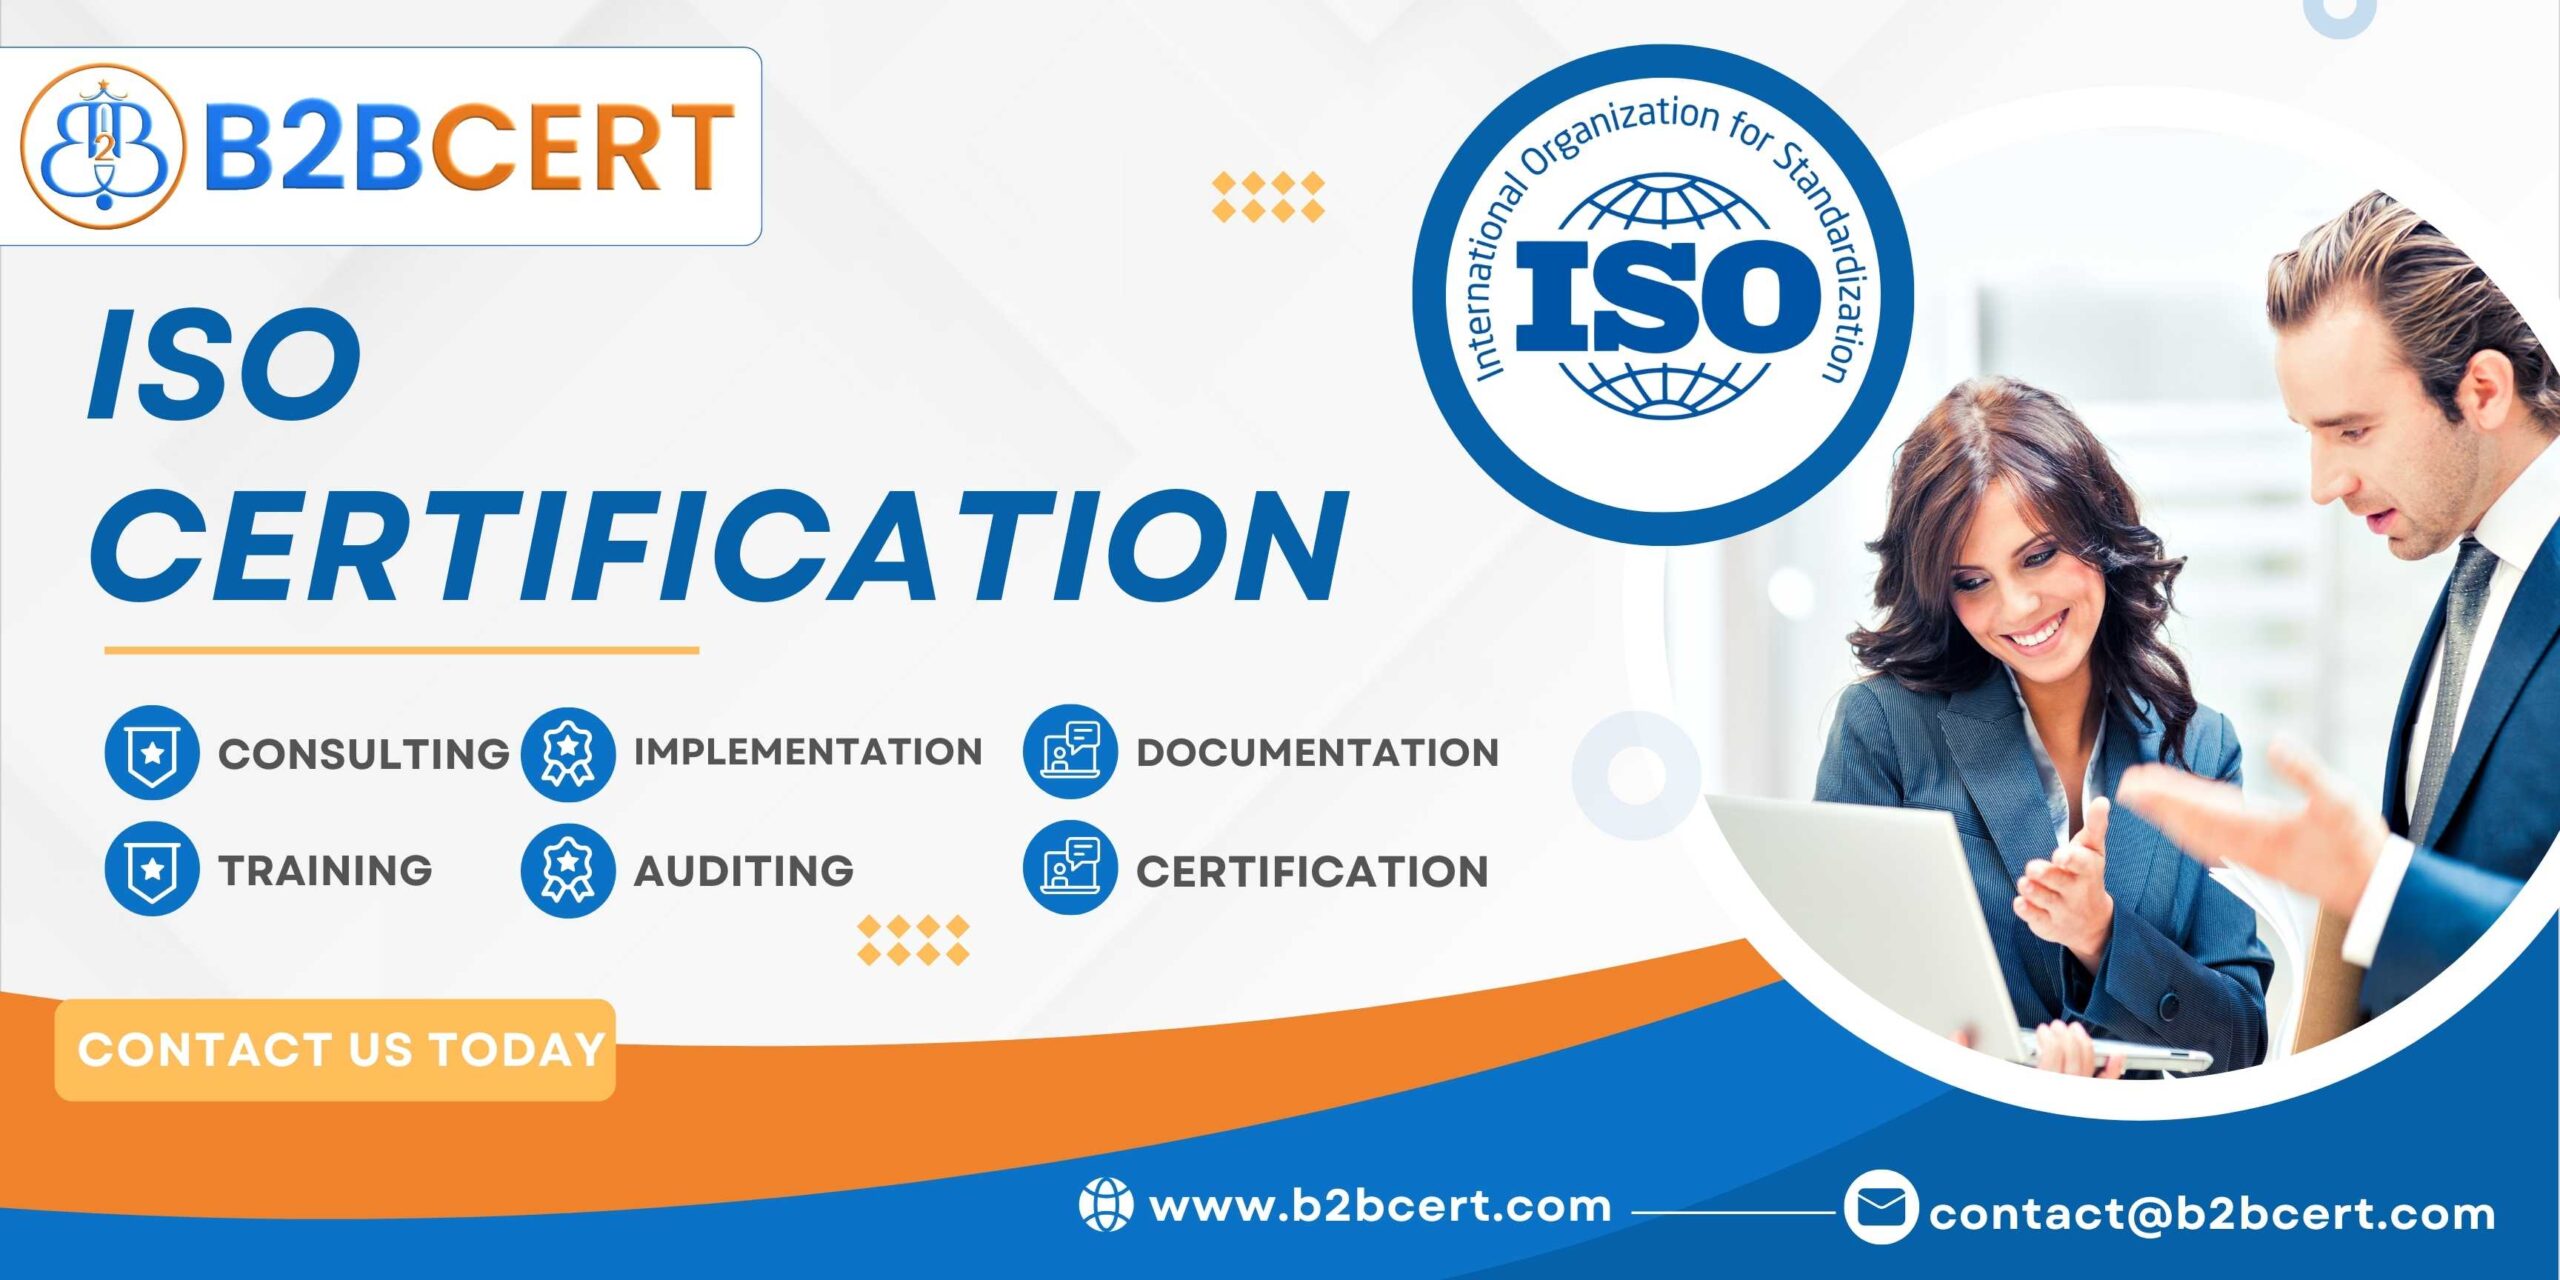 This Complete Guide Explains ISO 15189 Certification